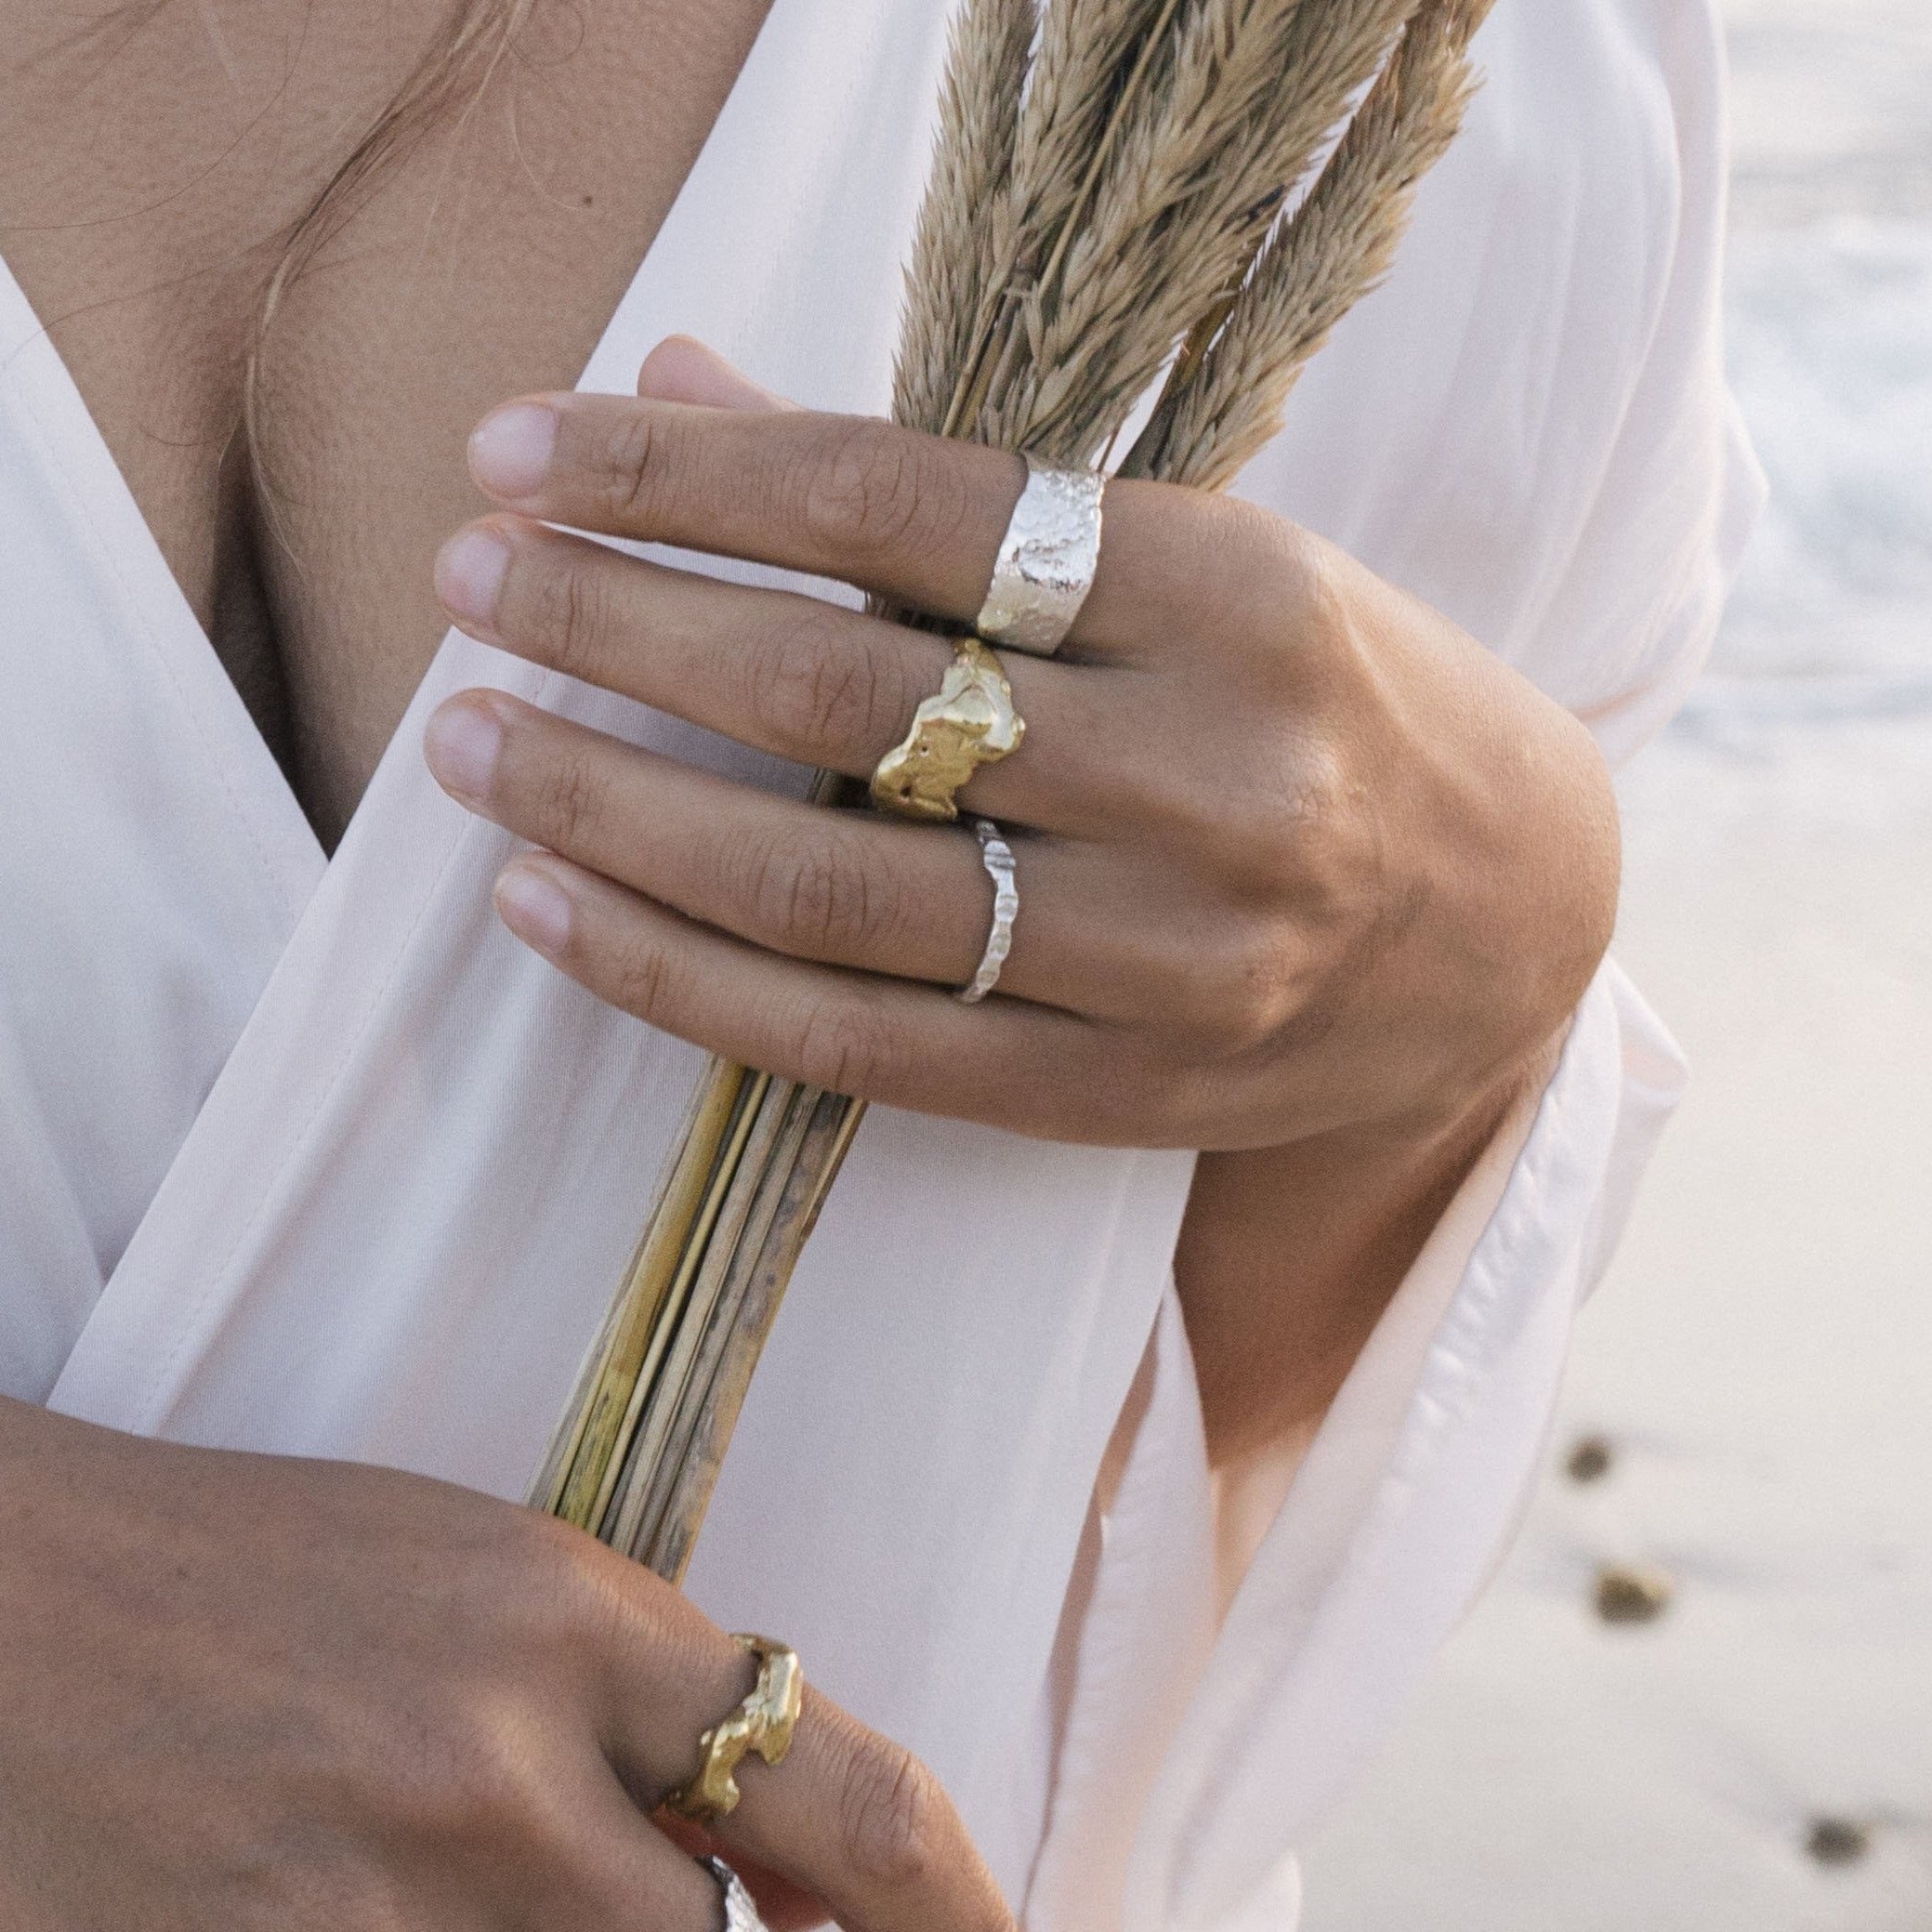 The Slim shell ring is a direct imprint from a shell that was foraged from Bournemouth beach. Perfectly imperfect details make this ring so special. Wear on its own, or stack with other rings to add a little ocean magic to your every day.